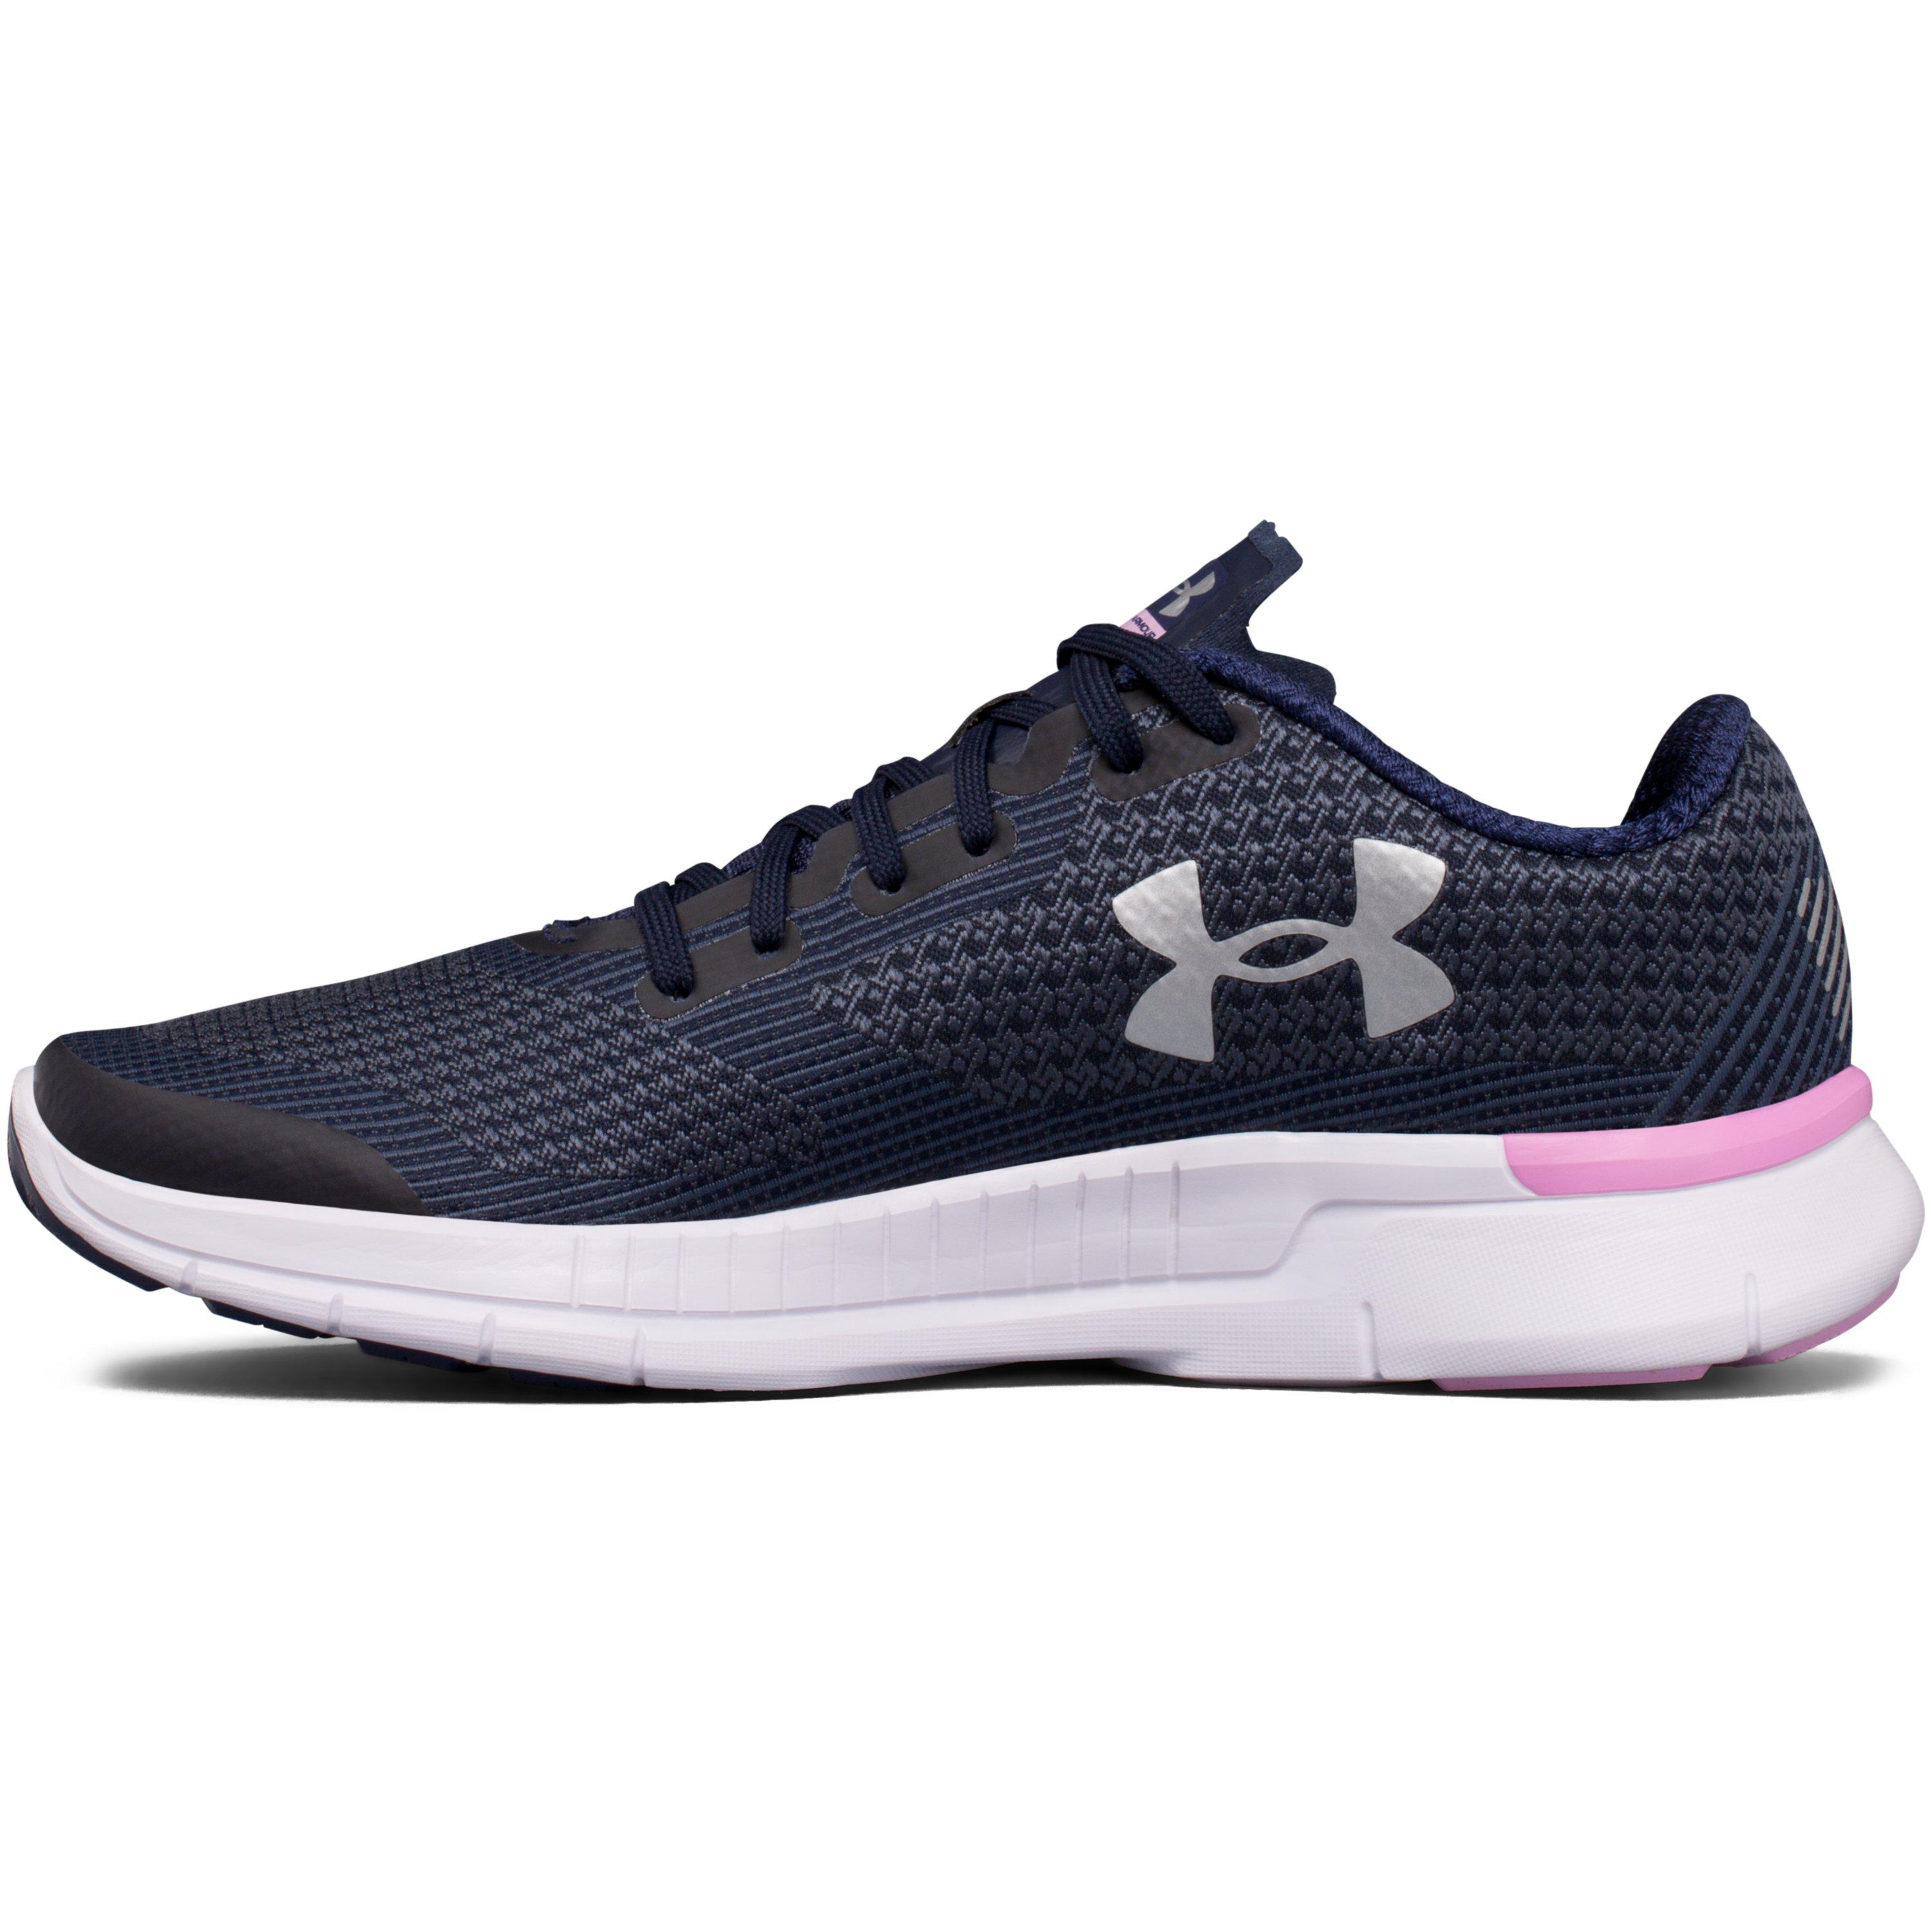 Under Armour Rubber Women's Ua Charged Lightning Running Shoes in Blue |  Lyst